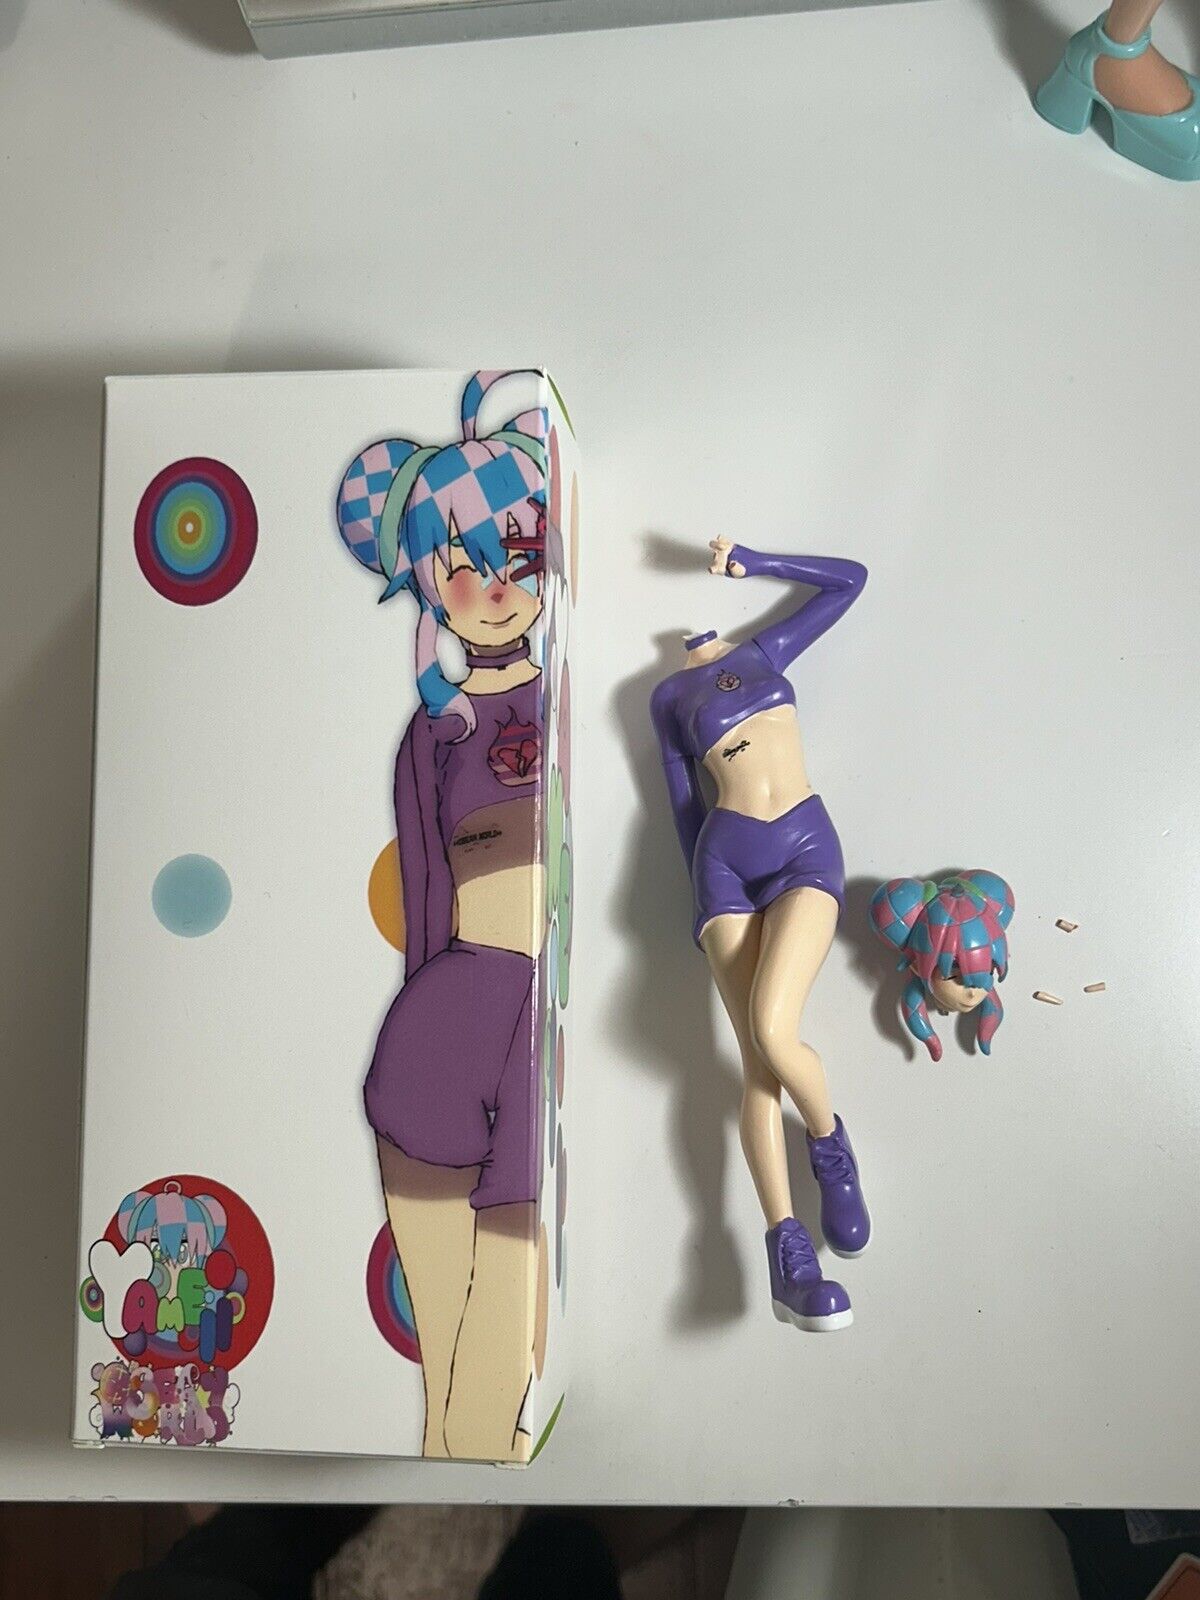 ON HOLD FOR ONE DAY SELLING FOR $20 Broken Yameii Figure EXTREMELY RARE